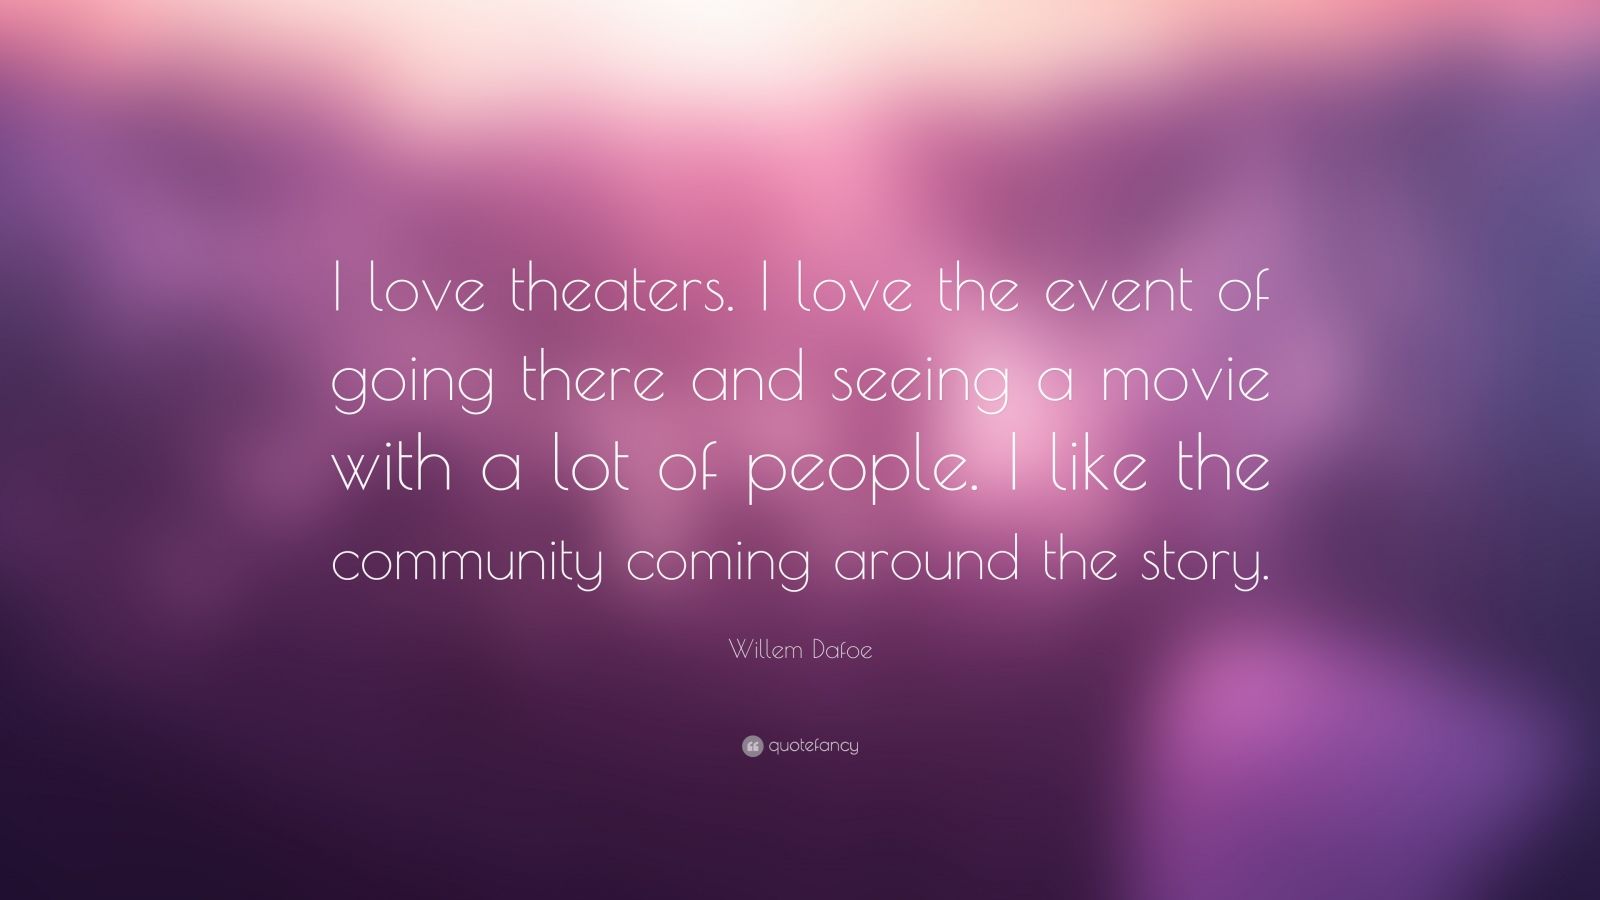 Willem Dafoe Quote “I love theaters I love the event of going there